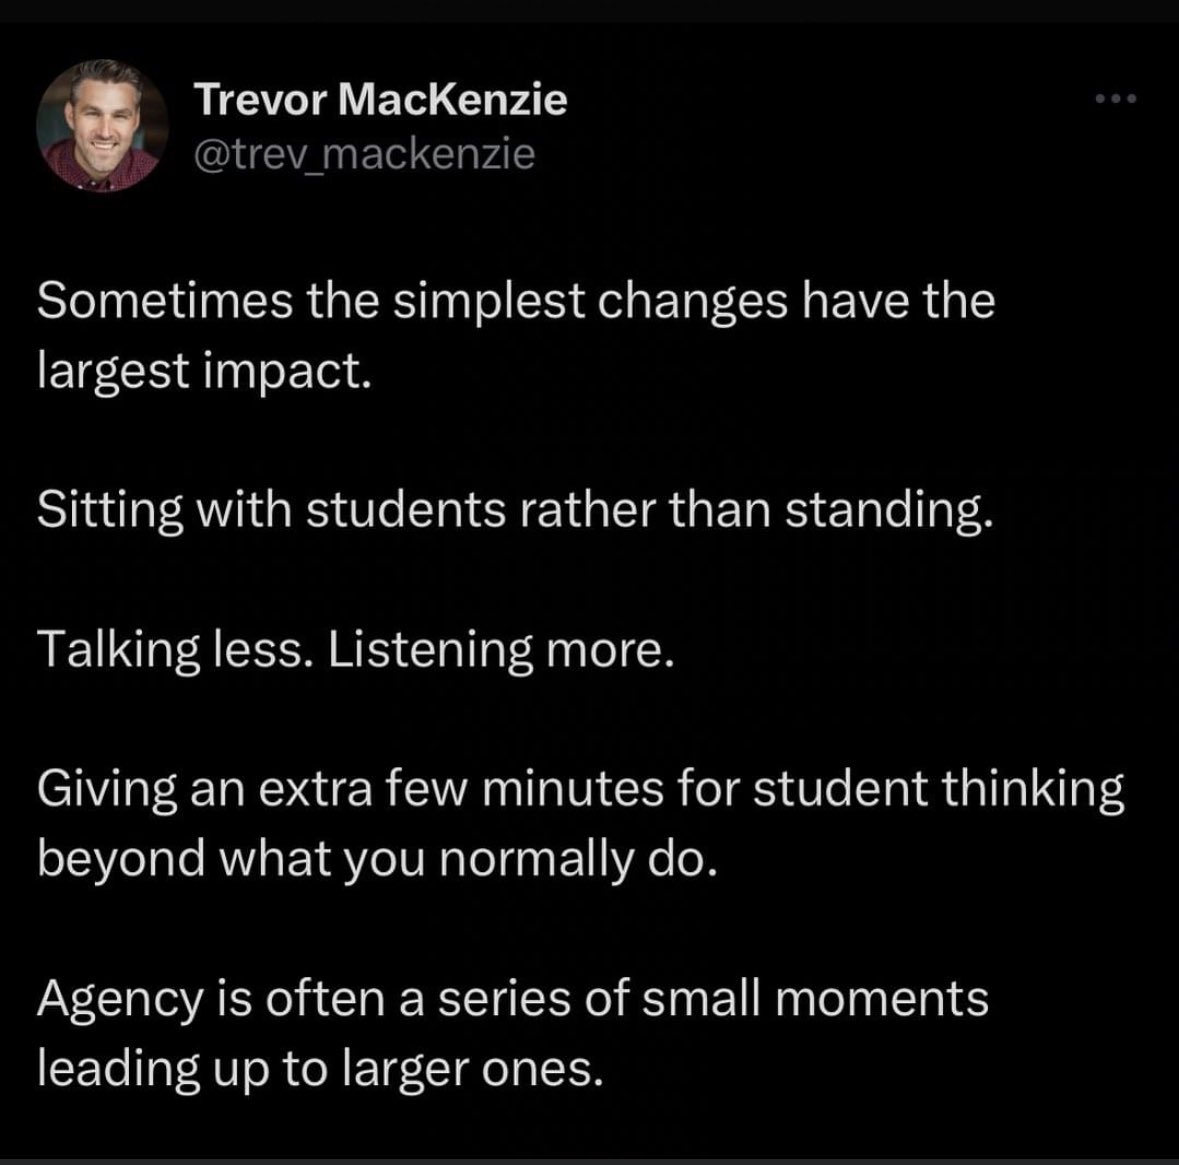 This year how are you SHOWING you value agency in all your interactions—(students, teachers, parents, etc) #SmallMomentsMATTER 
@KEDC1 @KEDCGrants